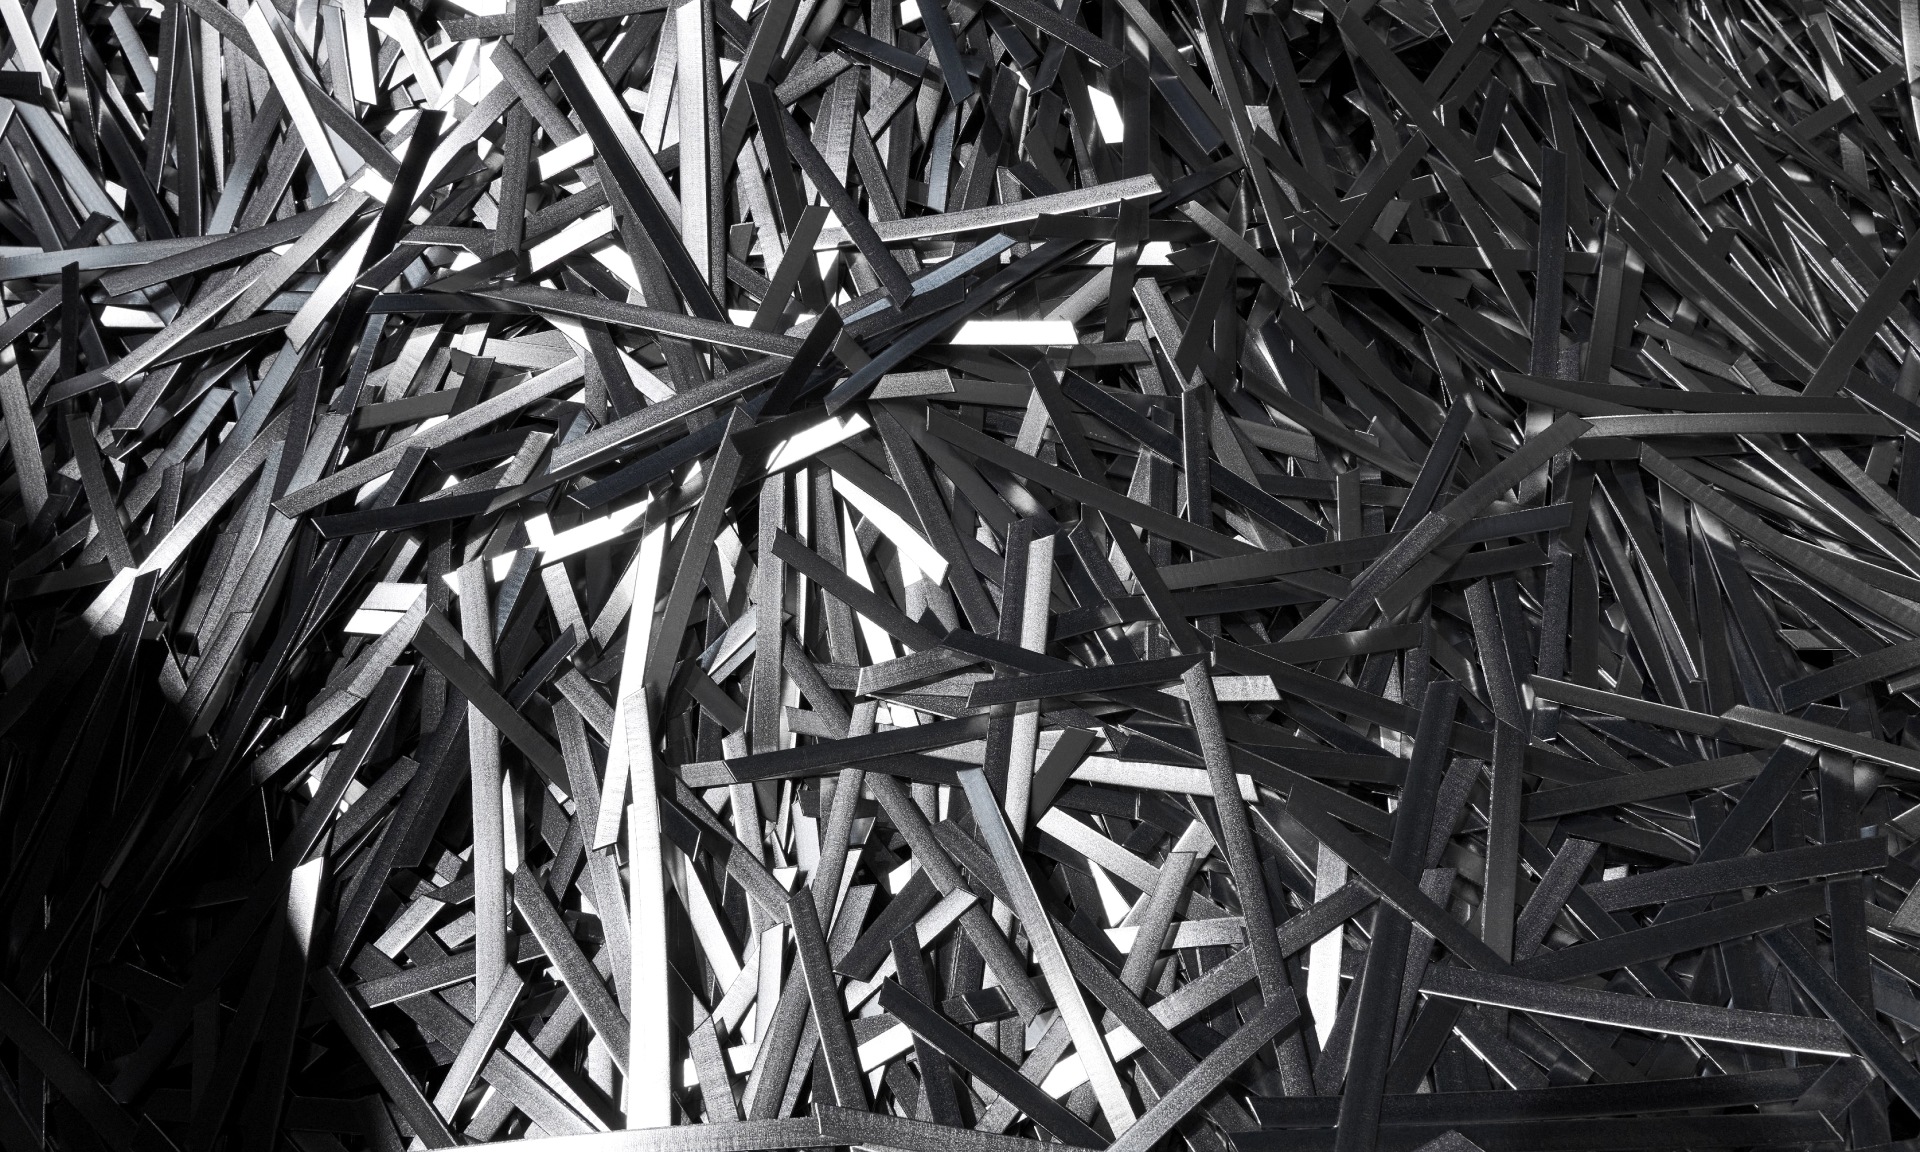 A large accumulation of scrap metal cut into small pieces.